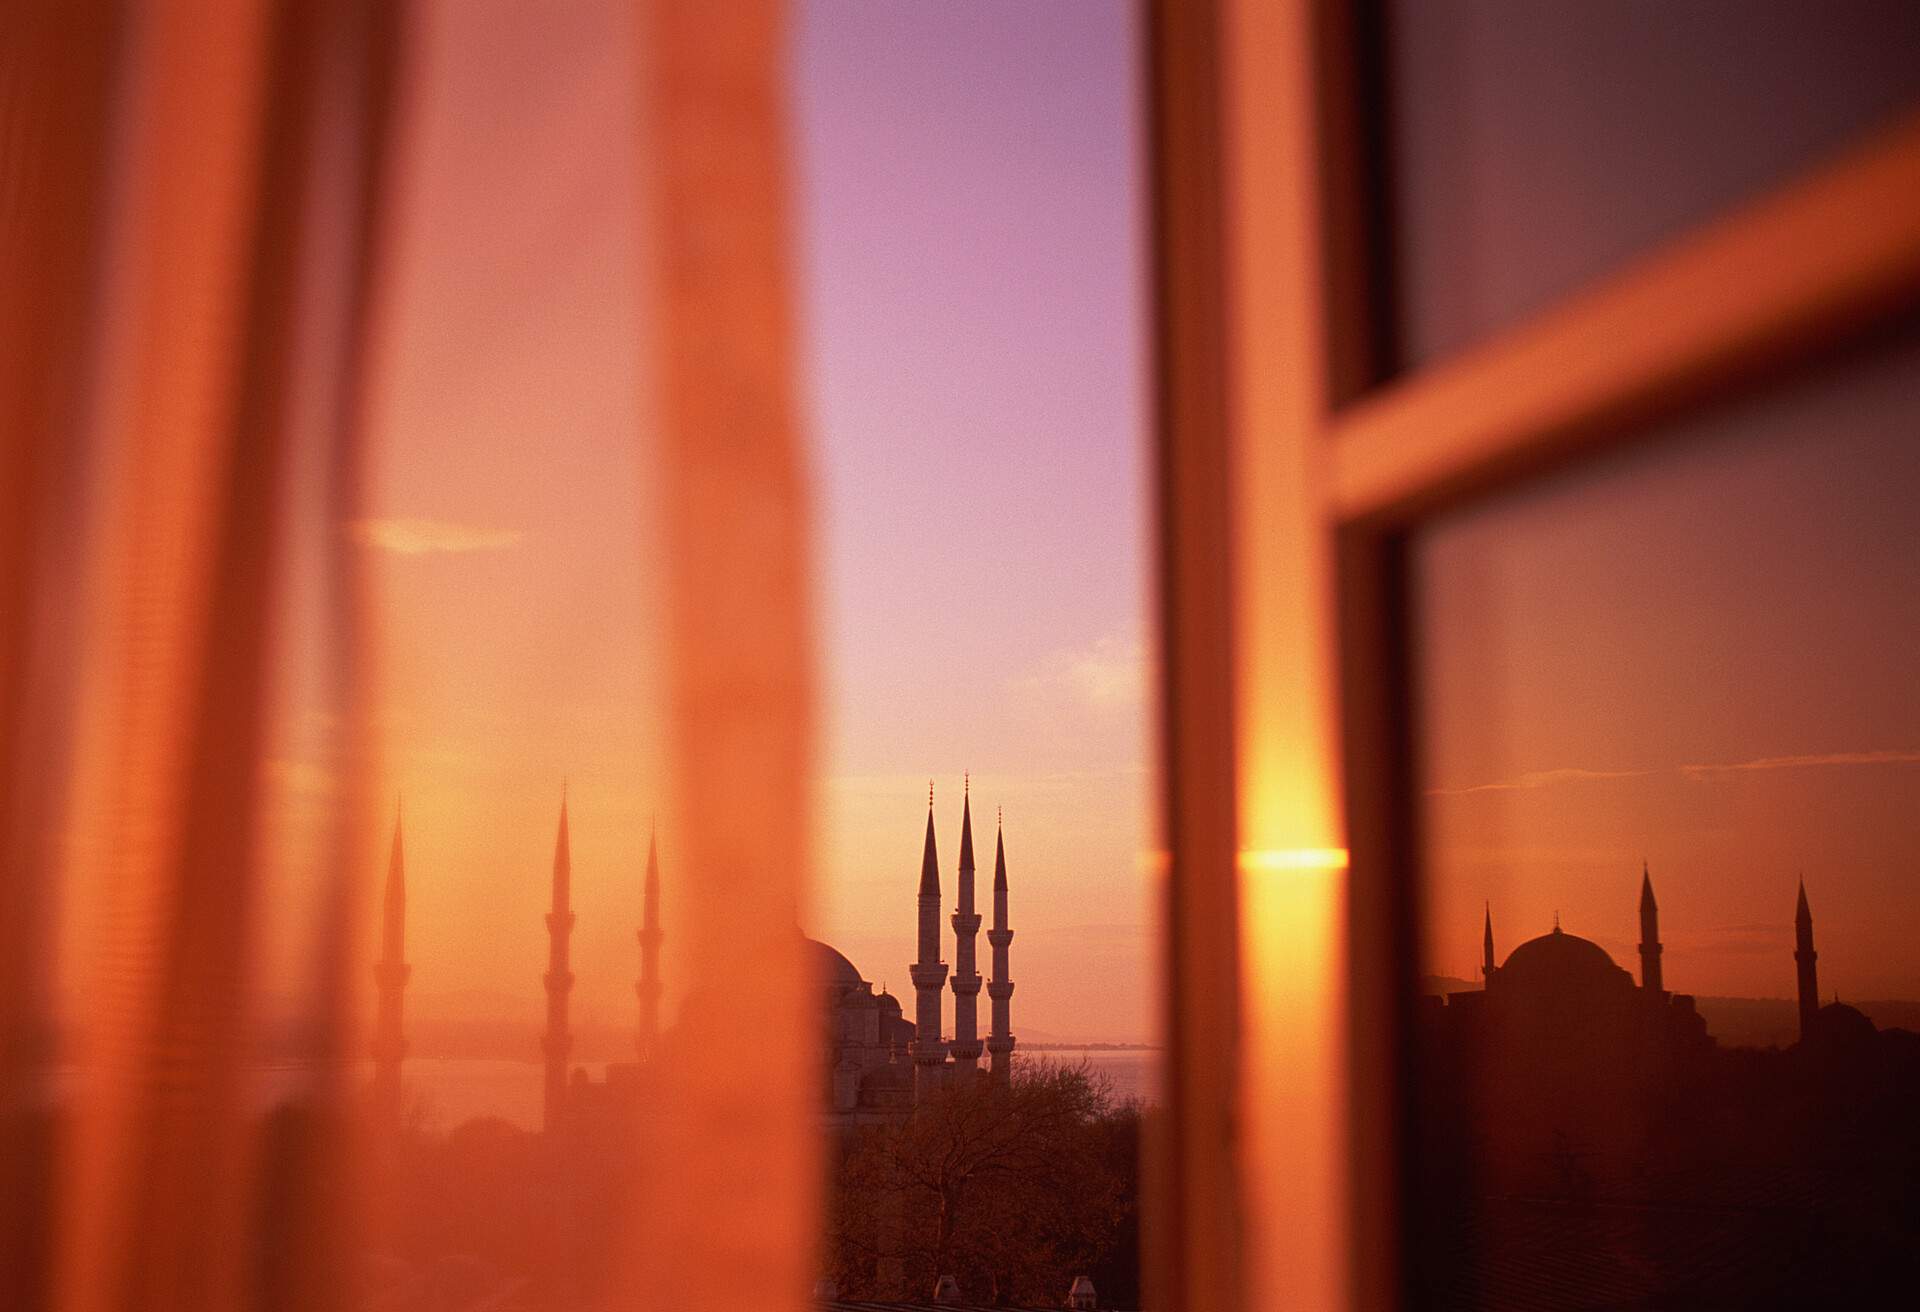 From a window hidden by a flowing curtain, a spectacular sight of the great Blue Mosque, with its remarkable domed top and soaring minarets.